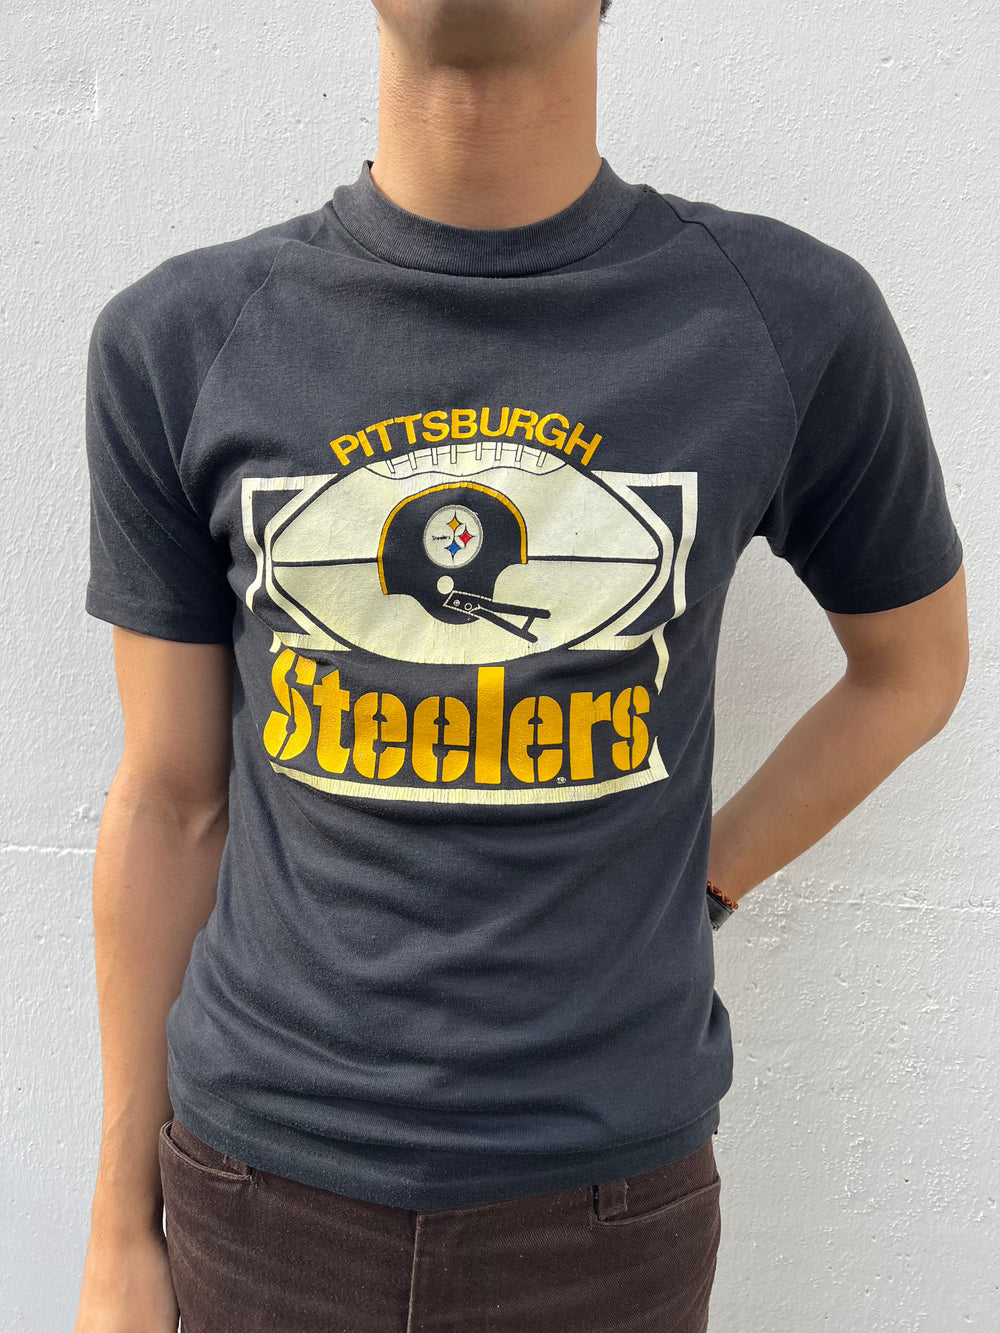 Vintage 70s Pittburgh Steelers NFL Football Single Stitched T-Shirt (S)